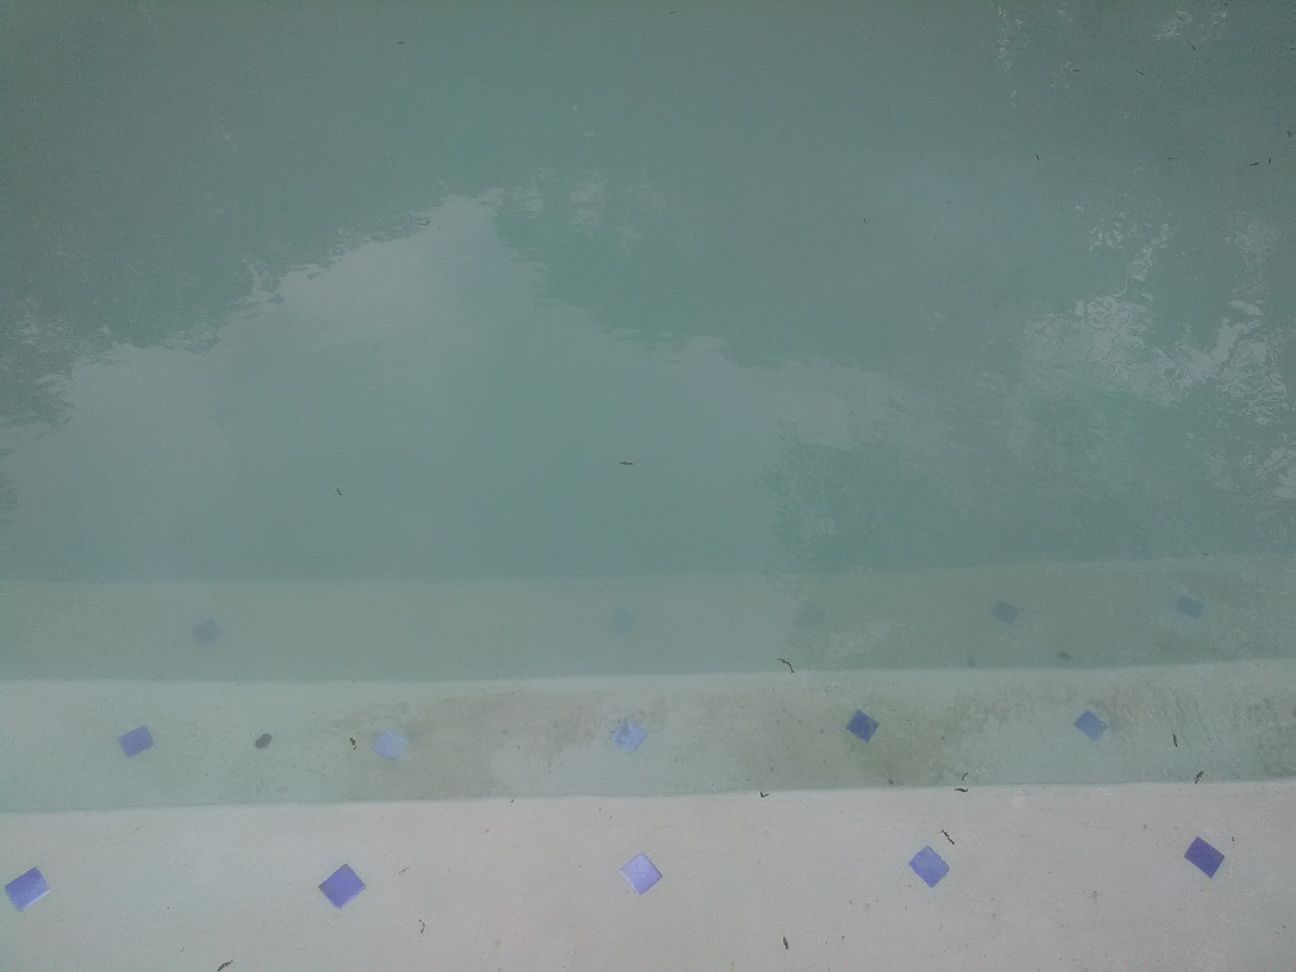 sedimentation settlement in the pool - BEFORE PHOT